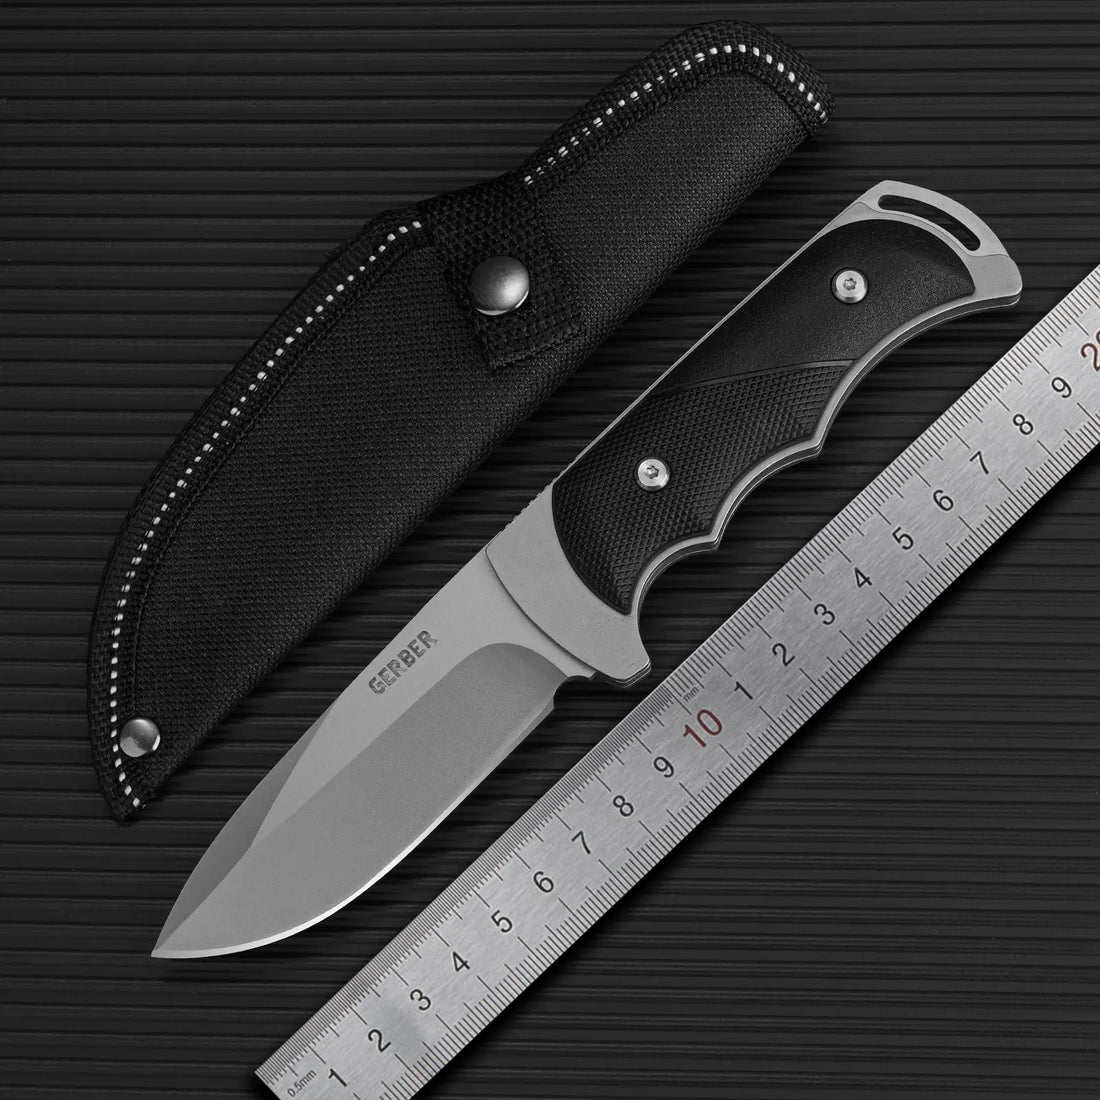  1PC outdoor high hardness straight knife, EDC portable fixed blade with sheath, suitable for camping, hiking, survival knives #